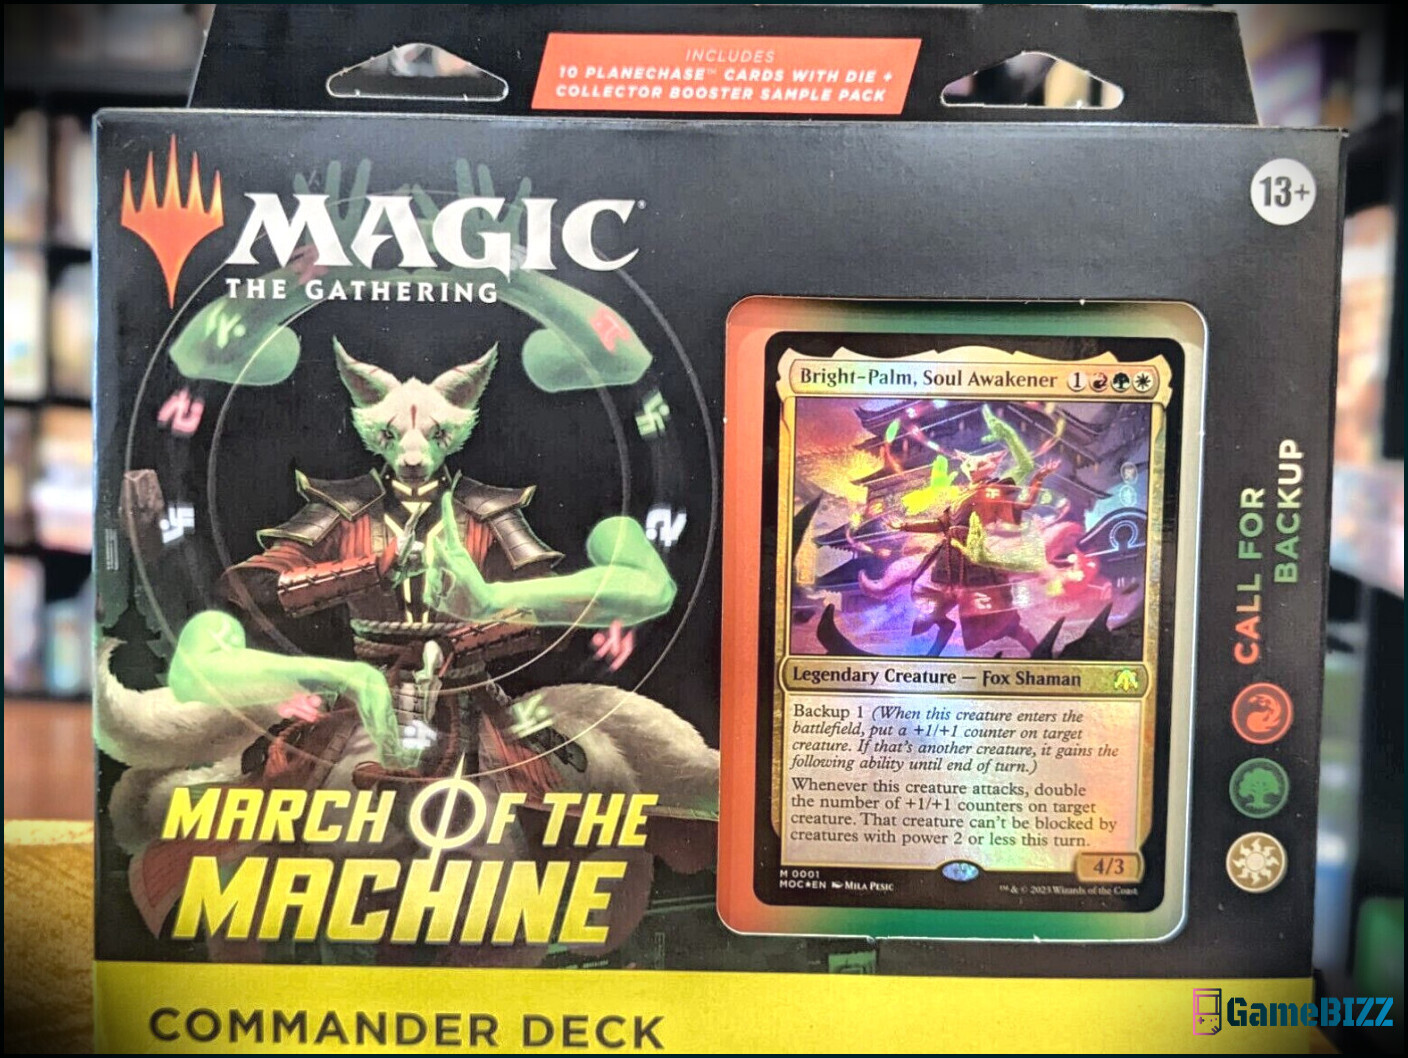 Magic: The Gathering - Die 10 besten Karten in March of the Machine's Call For Backup Commander Deck